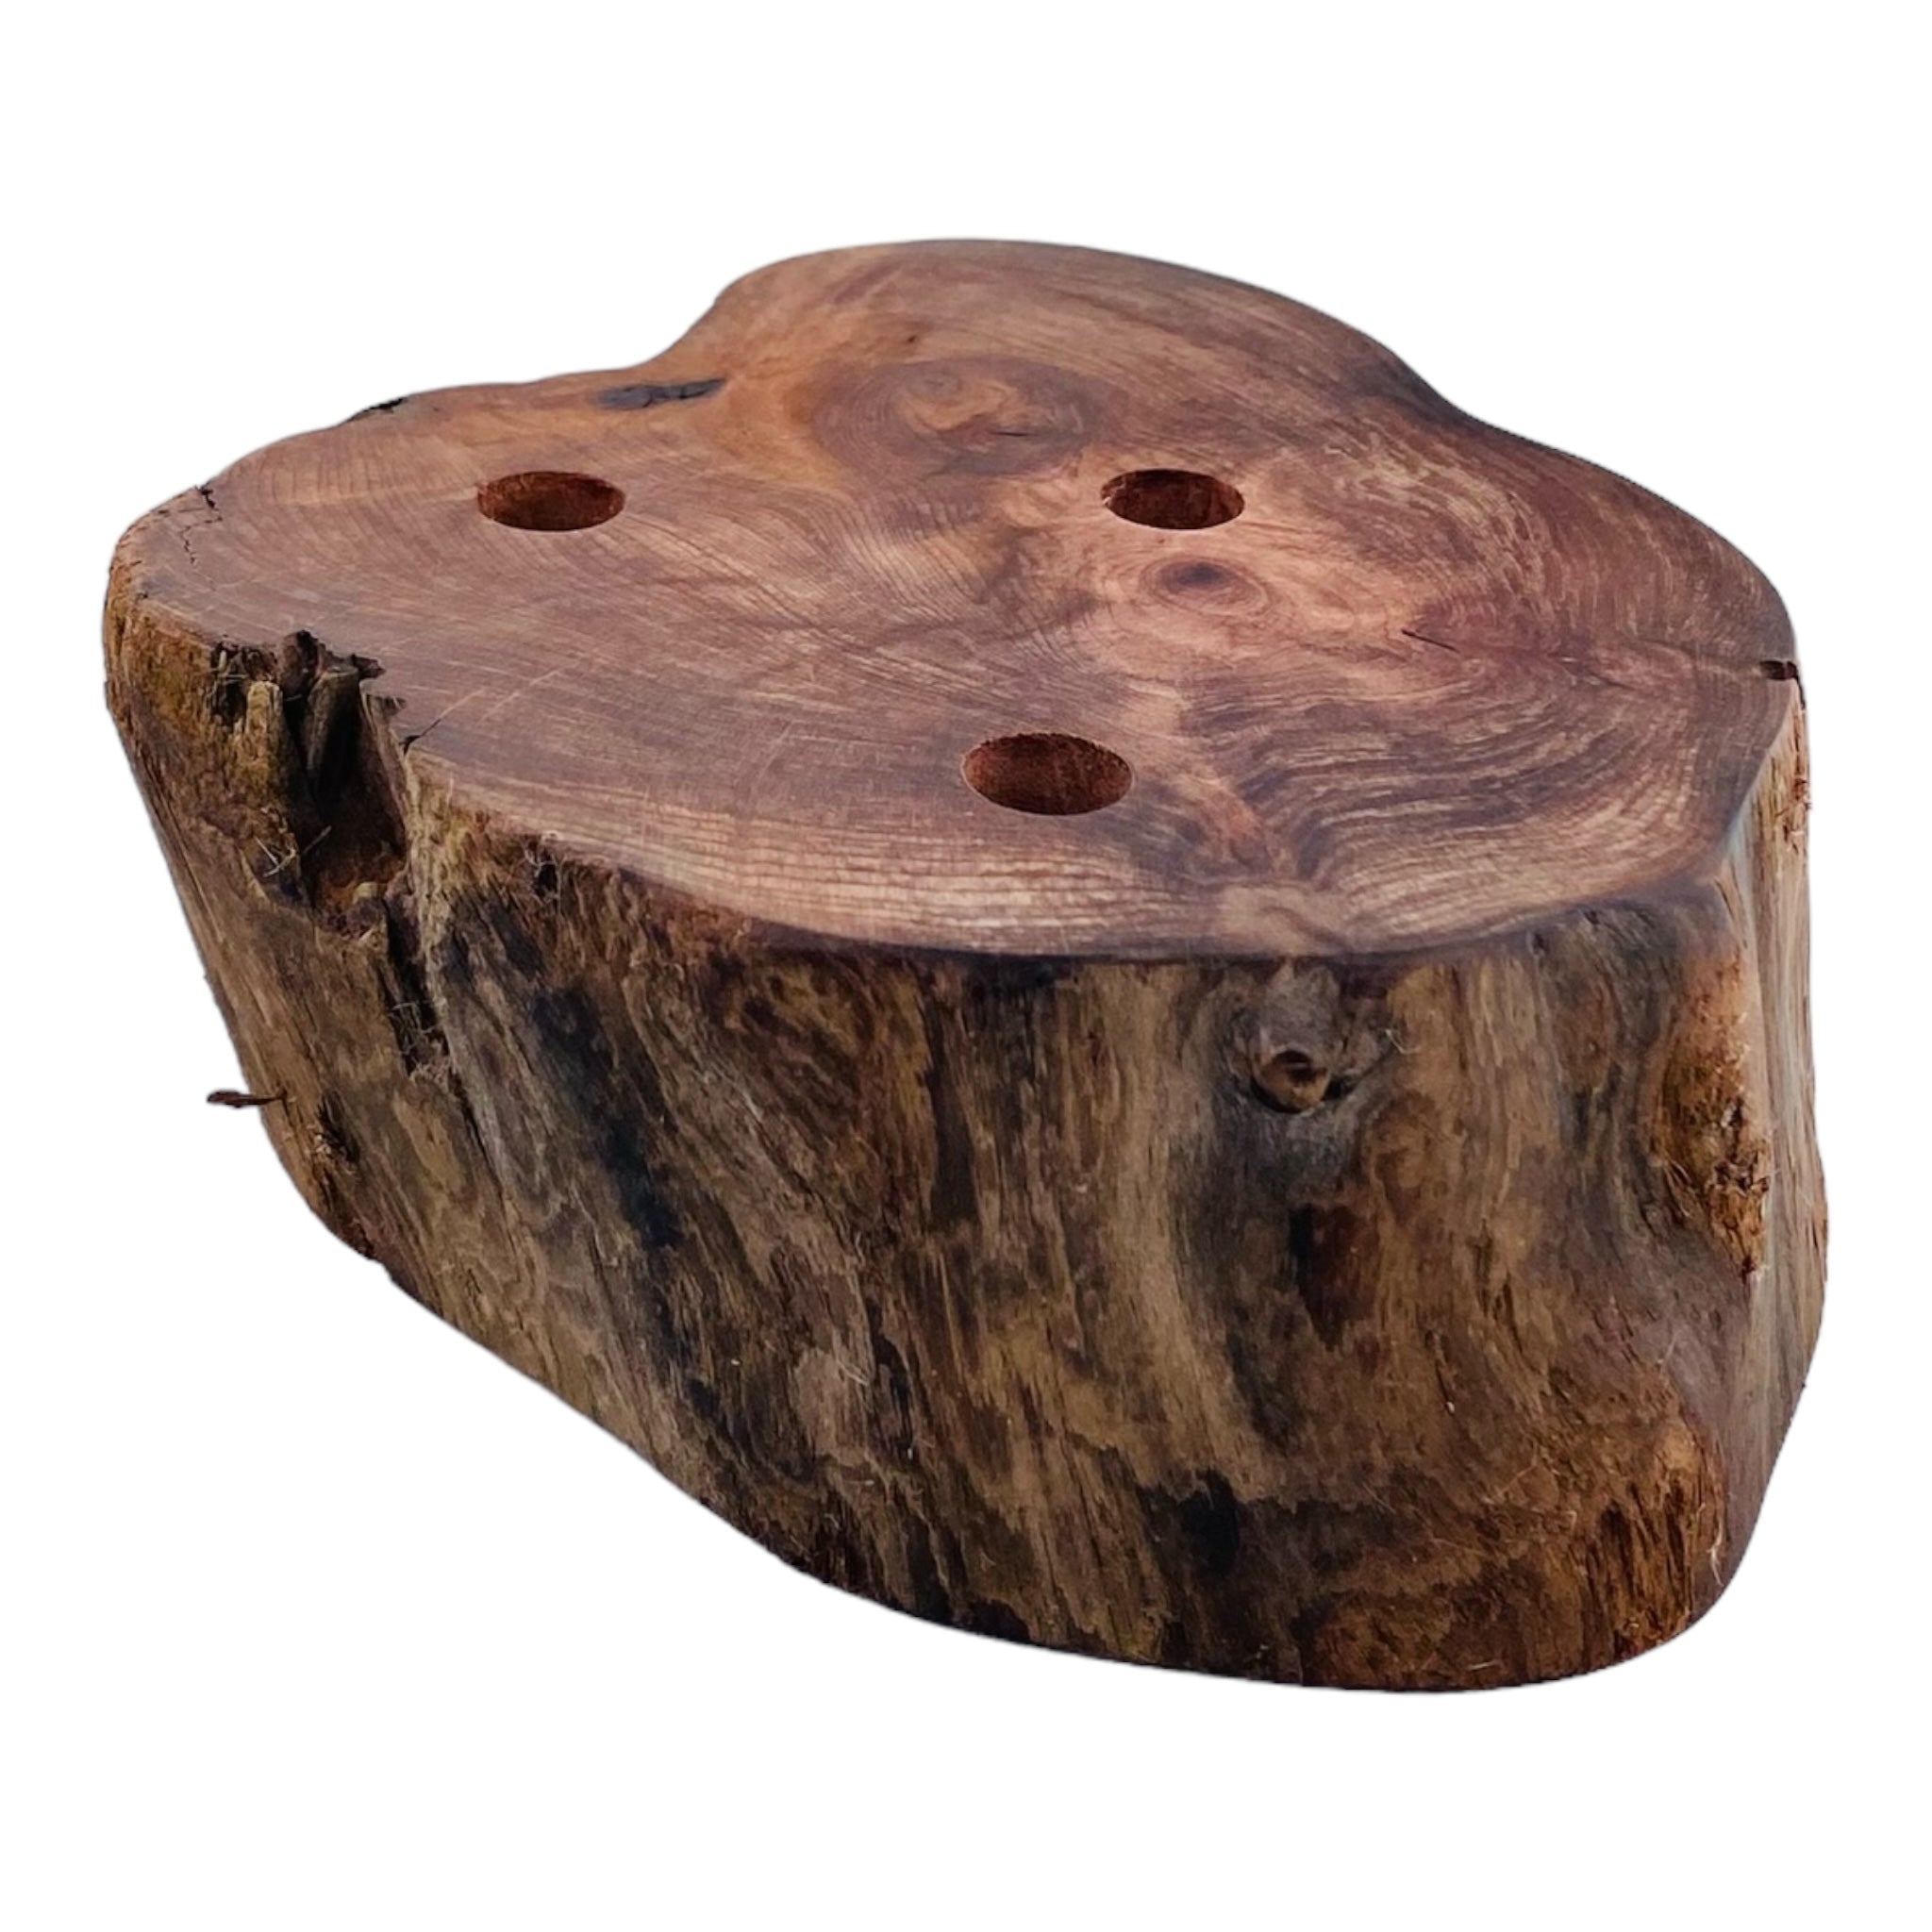 3 Hole Wood Display Stand Holder For 10mm Bong Bowl Pieces Or Quartz Bangers - Red Wood Burl With Live Edge